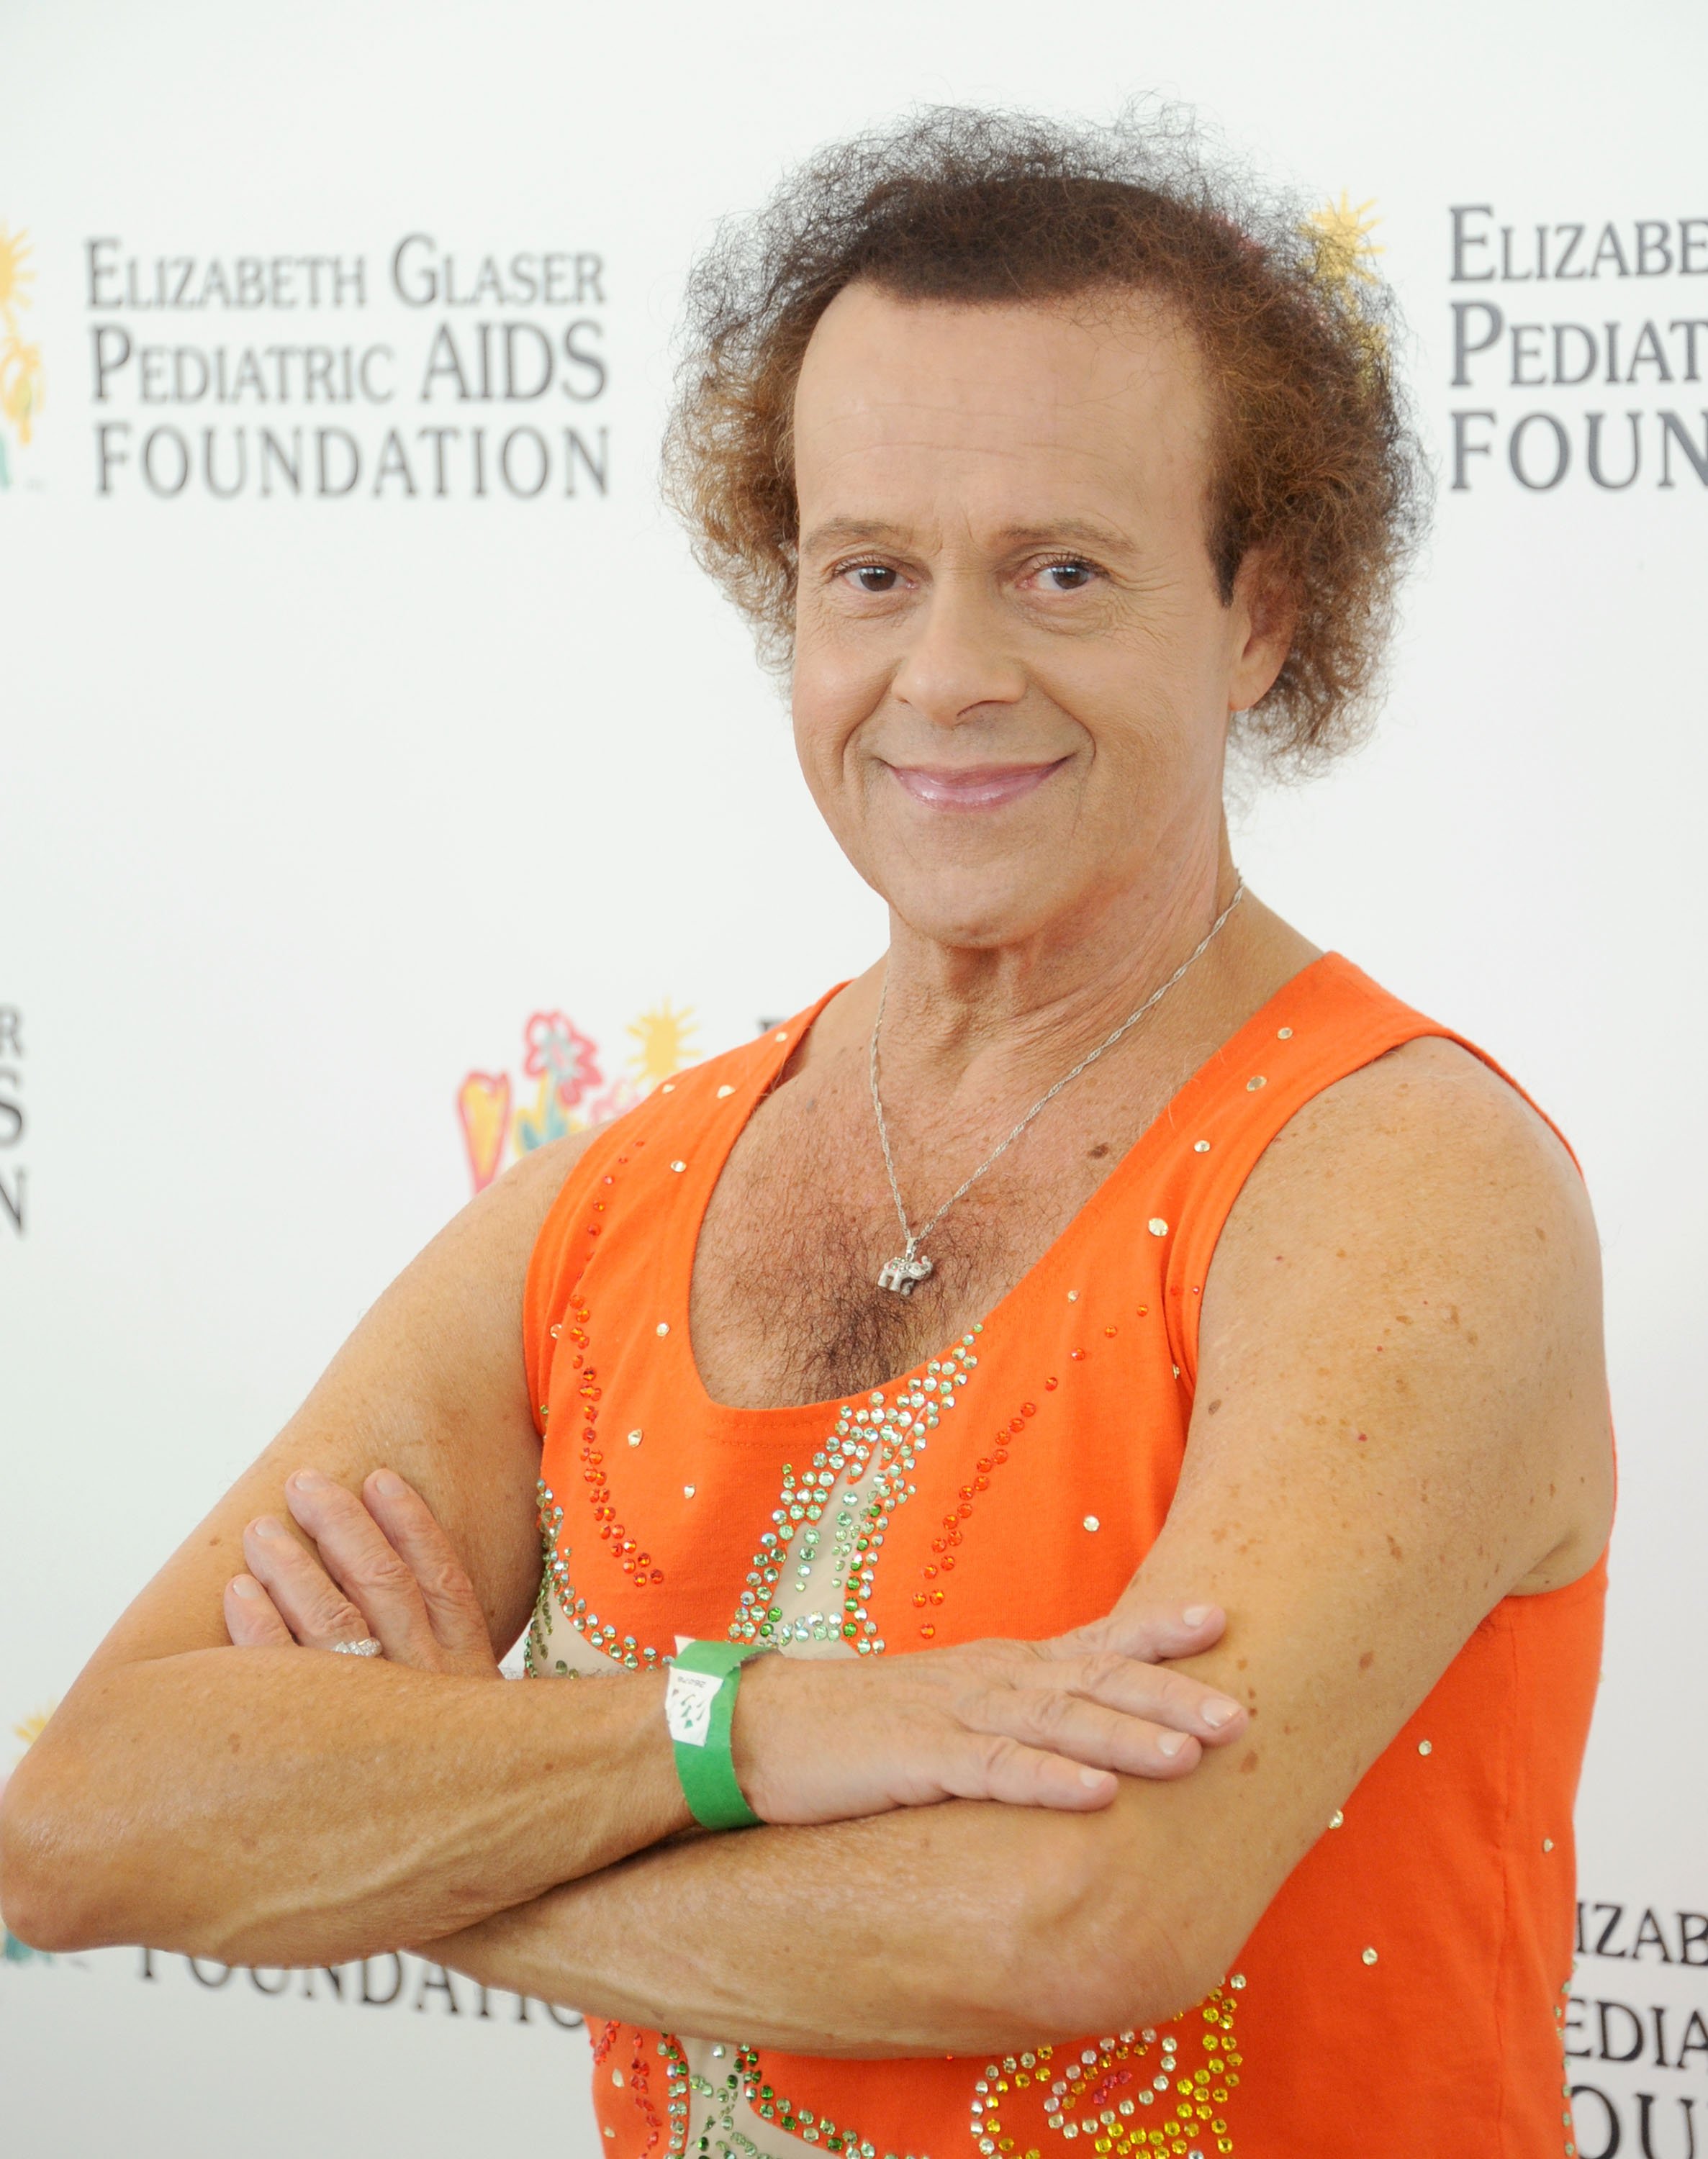 Actor/fitness personality Richard Simmons arrives at the Elizabeth Glaser Pediatric AIDS Foundation's 24th Annual "A Time For Heroes" at Century Park on June 2, 2013 in Los Angeles, California. | Source: Getty Images